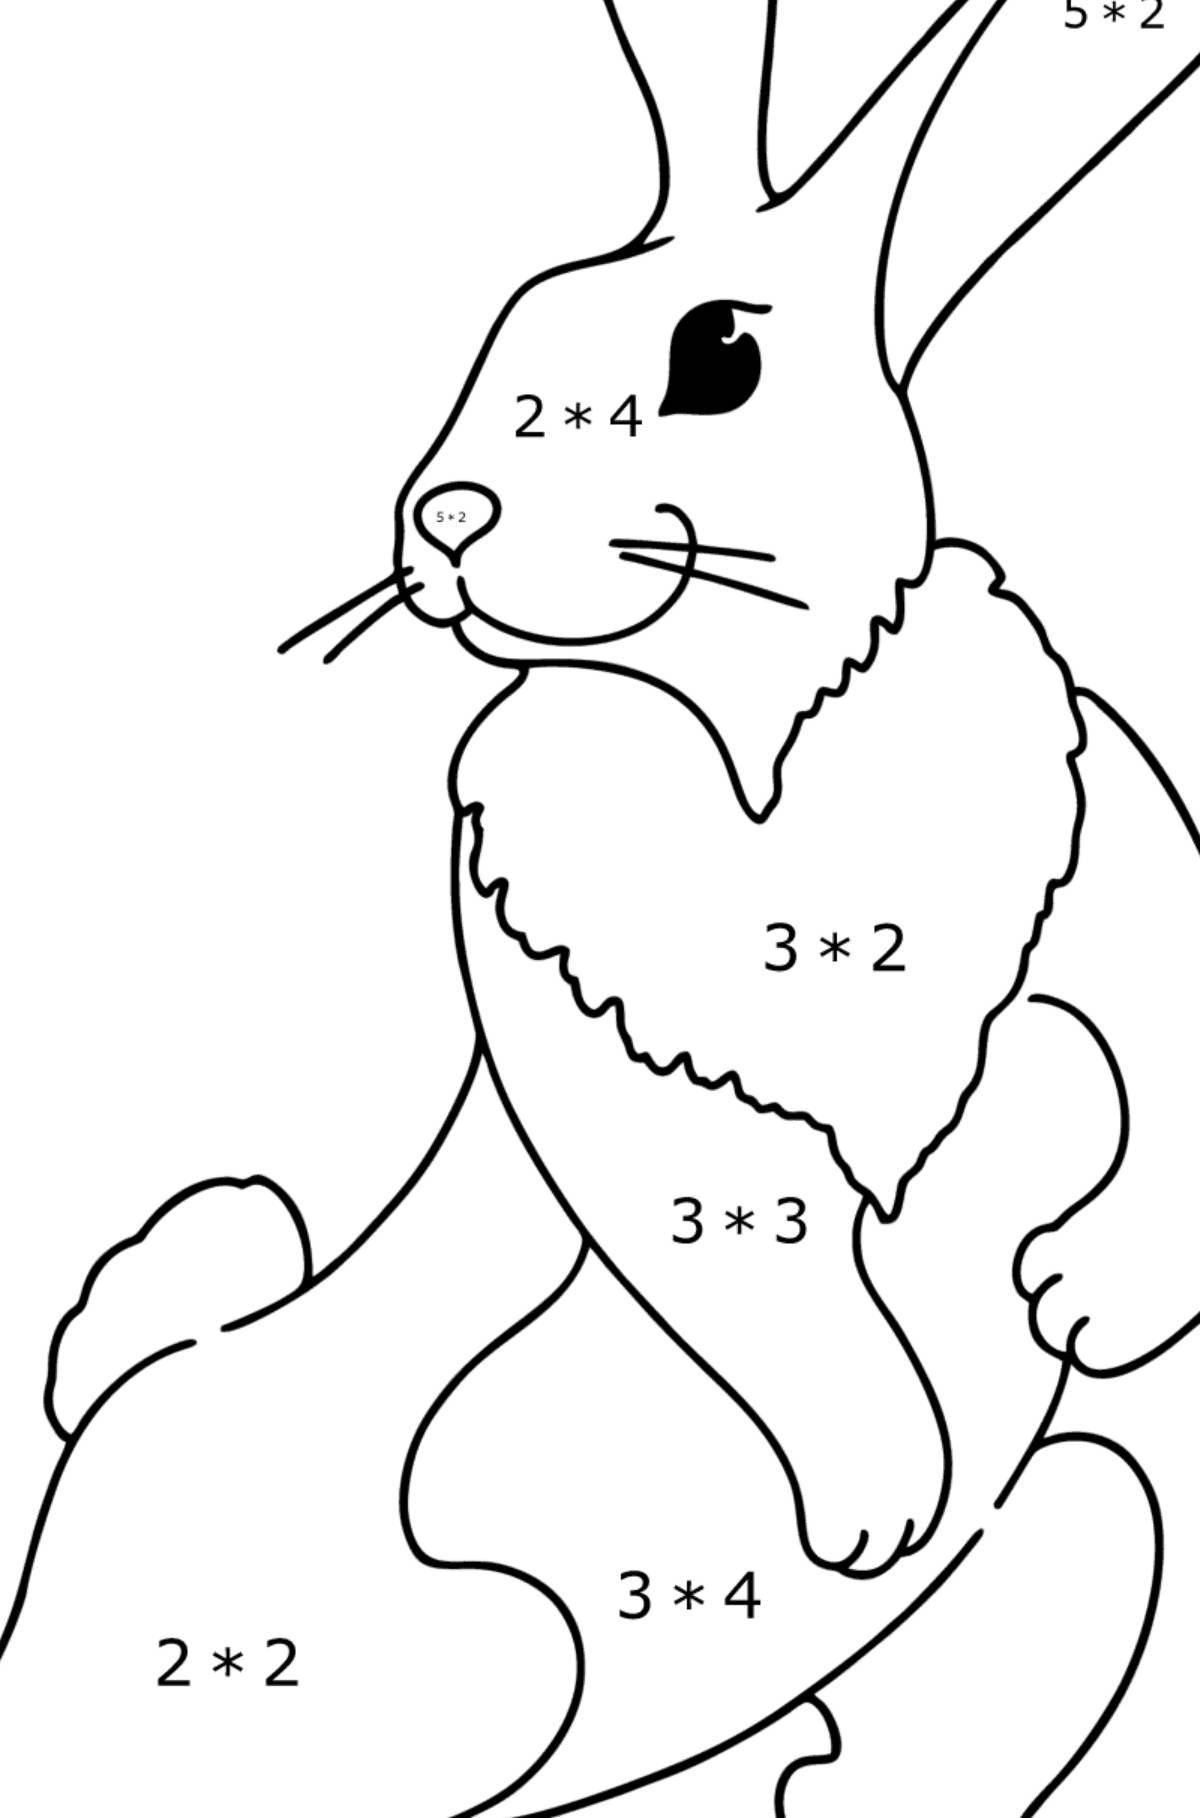 Wonderful bunny coloring by numbers